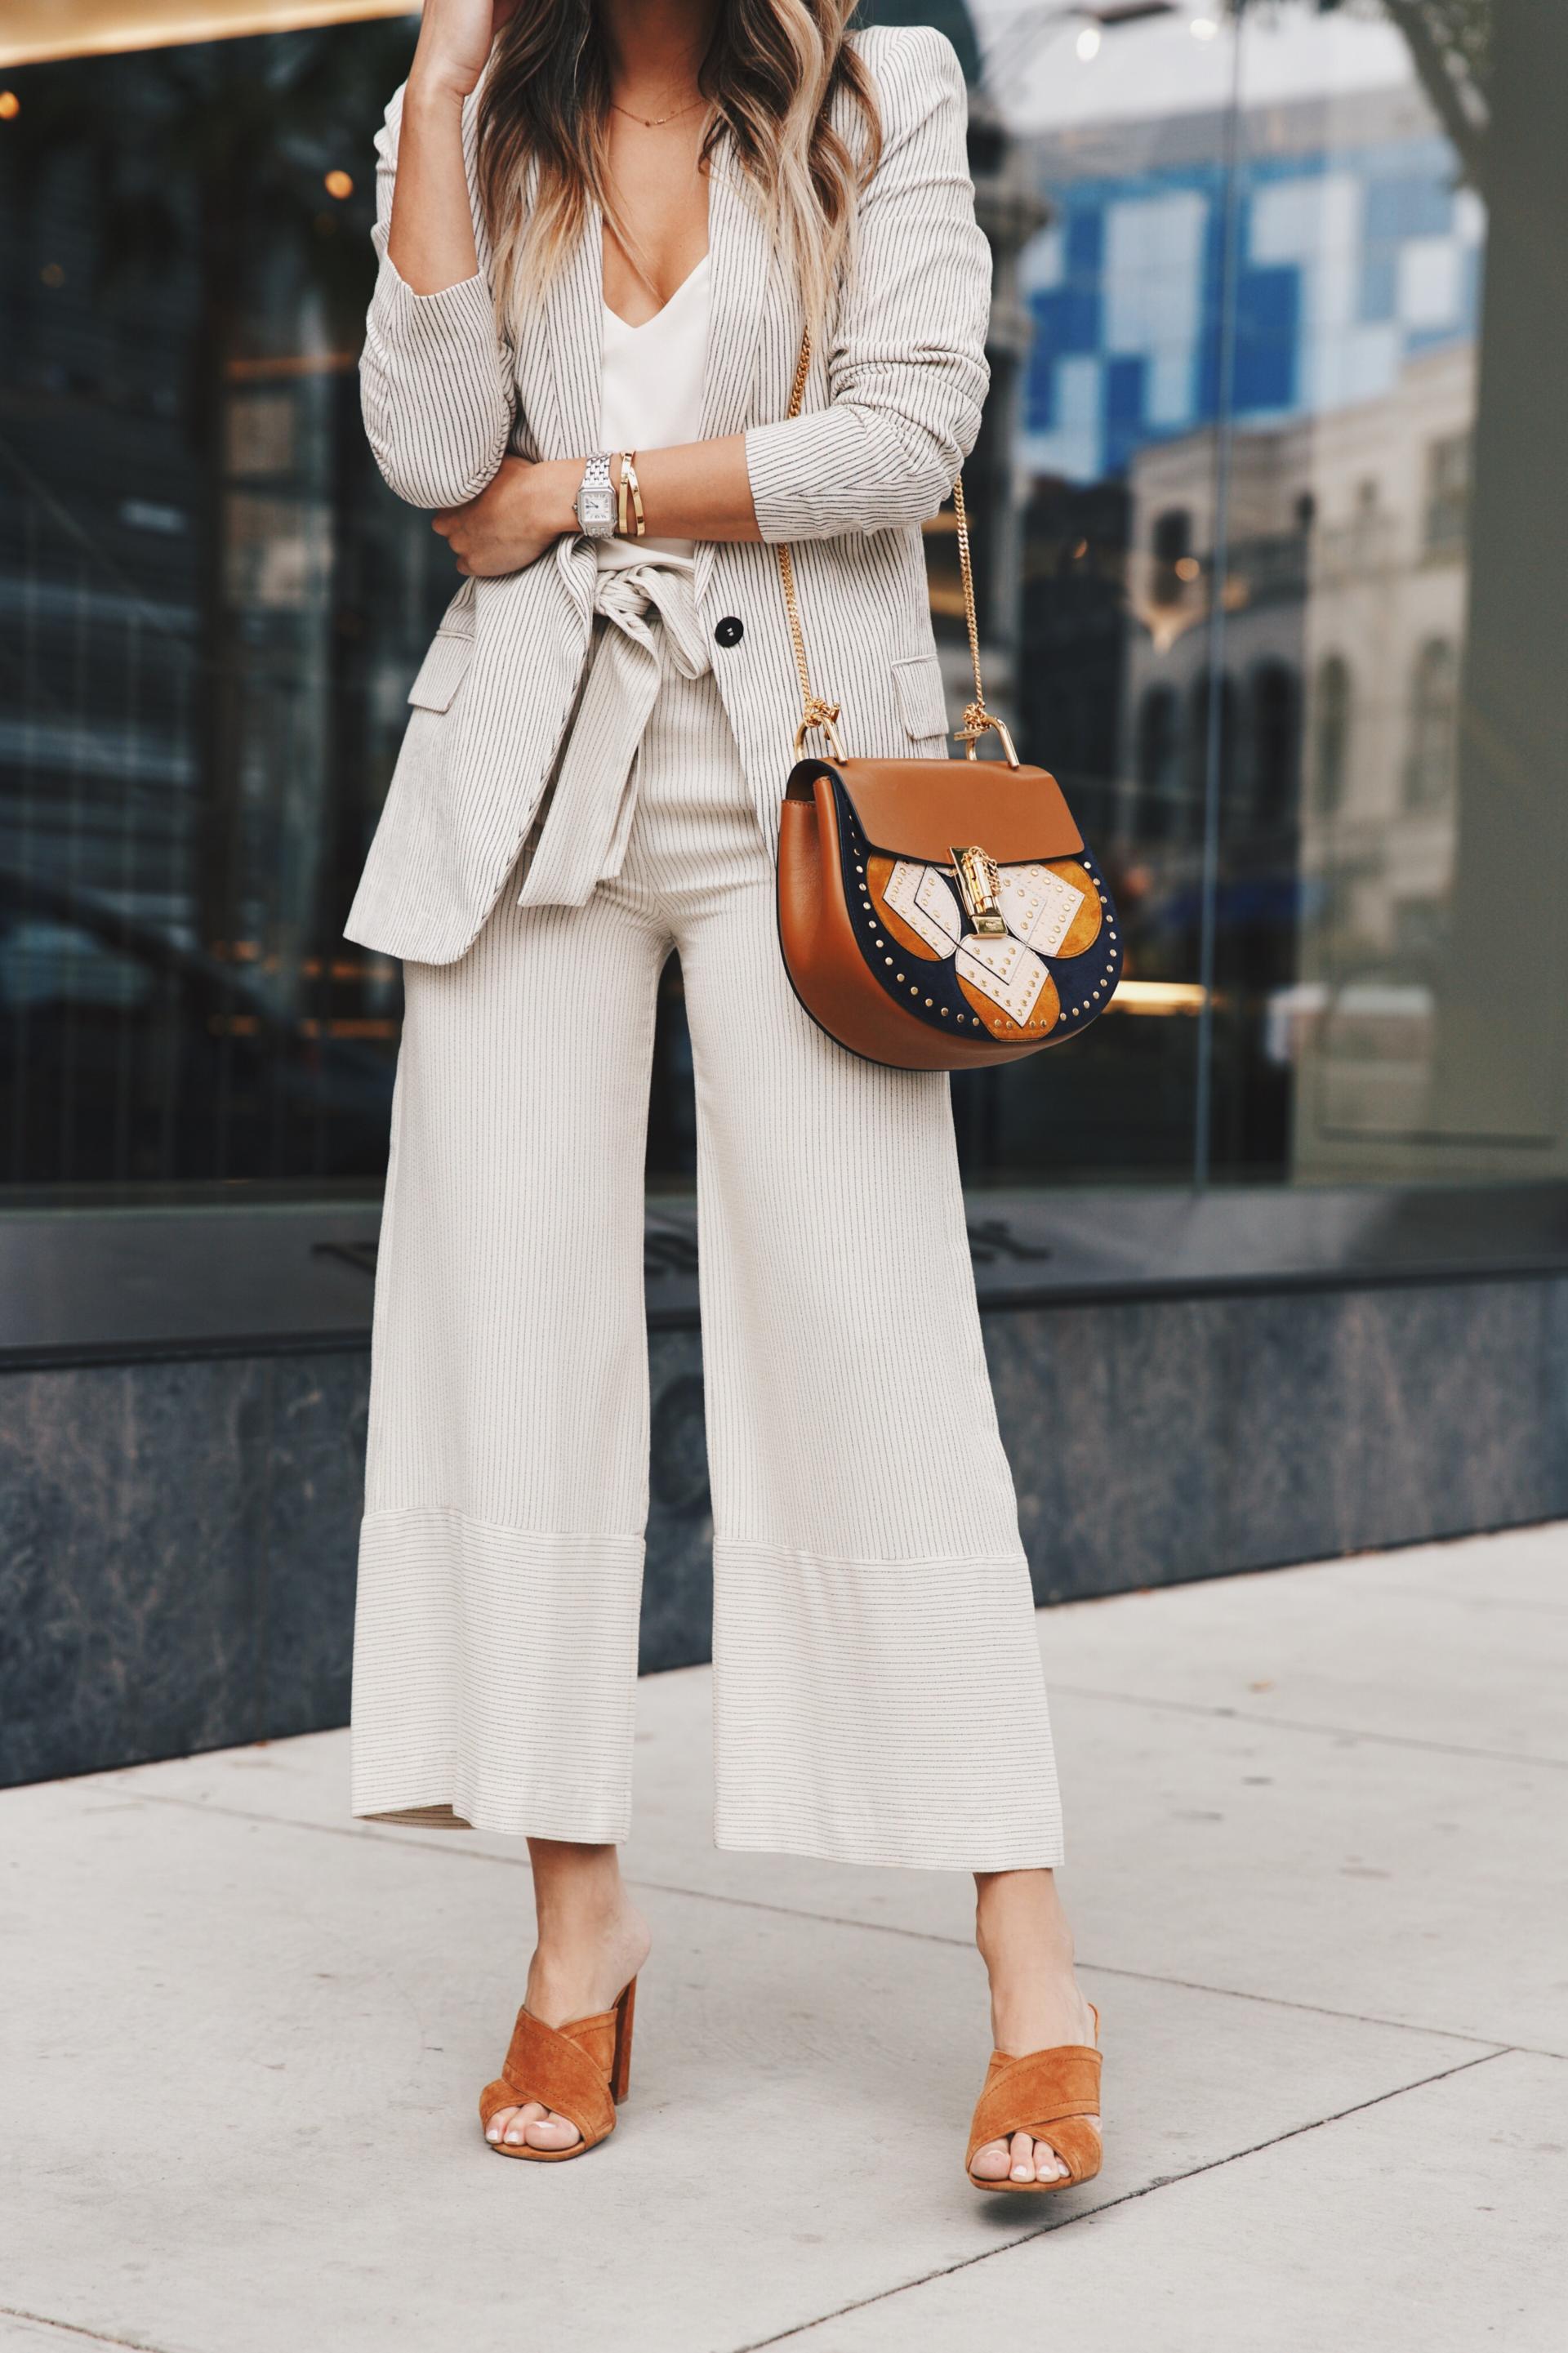 4 Ways To Make An Outfit Look Expensive The Girl From Panama